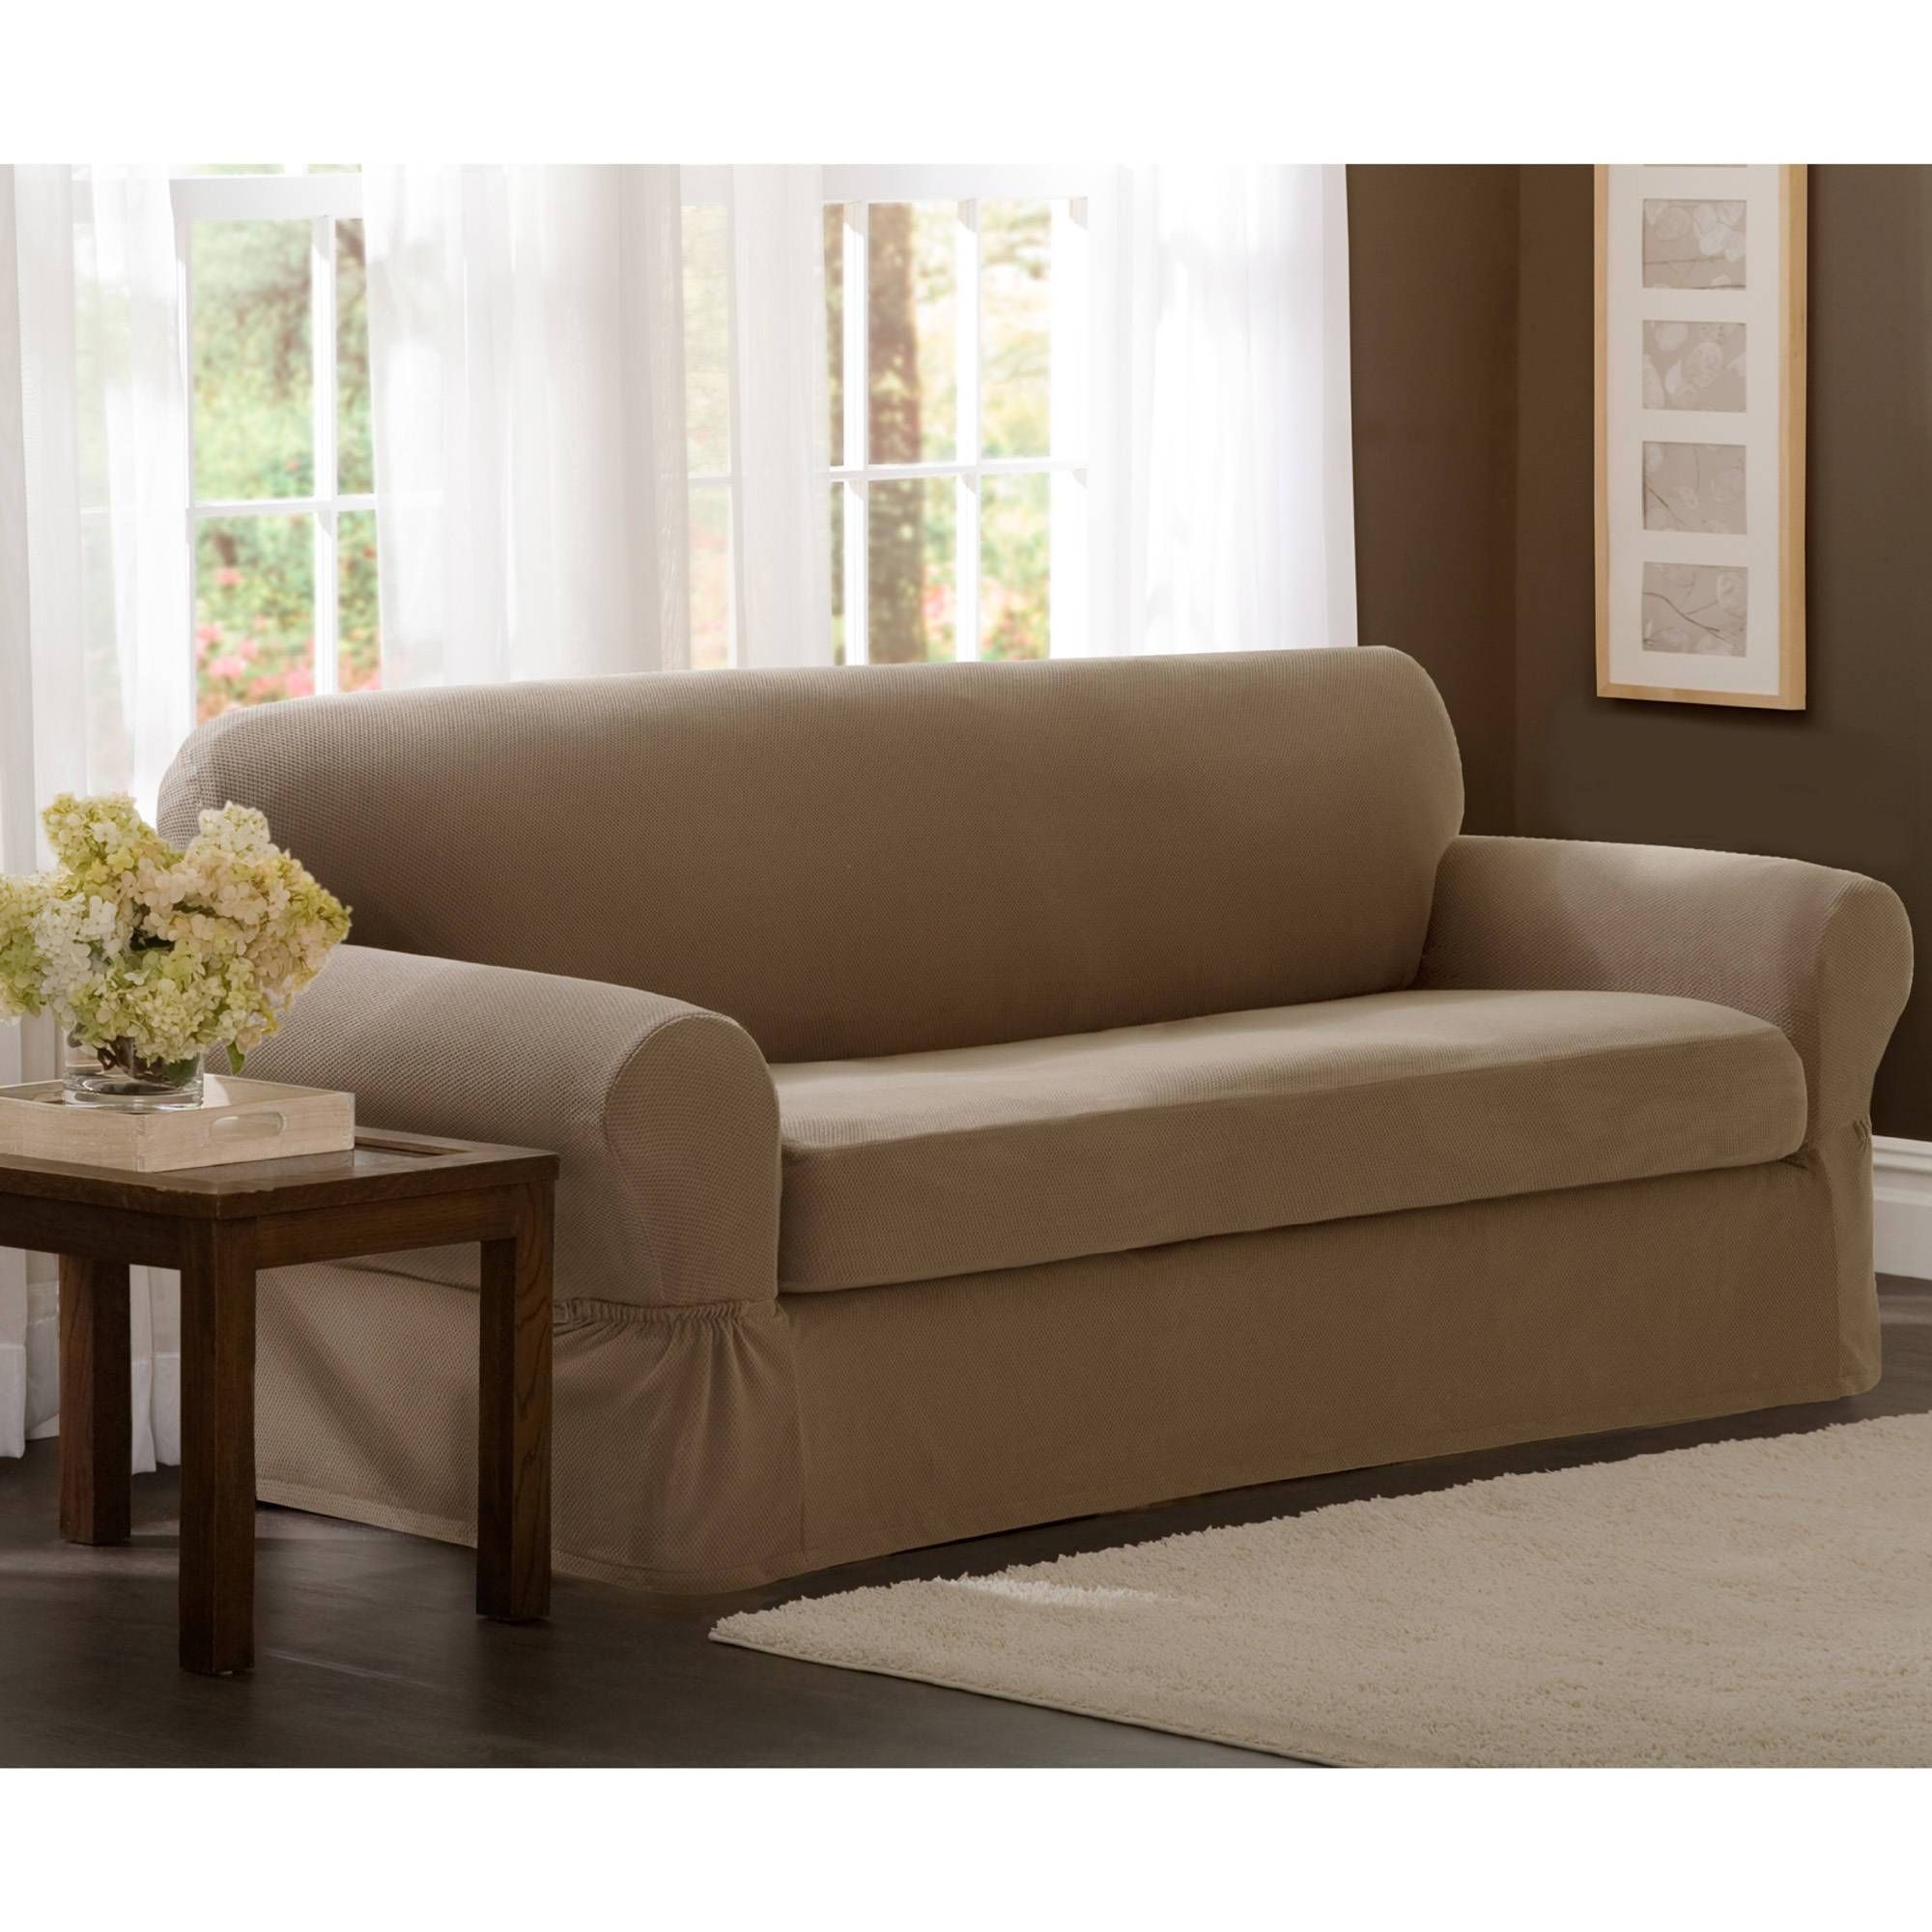 Furniture: Update Your Living Room With Best Sofa Slipcover Design Throughout Walmart Slipcovers For Sofas (View 5 of 30)